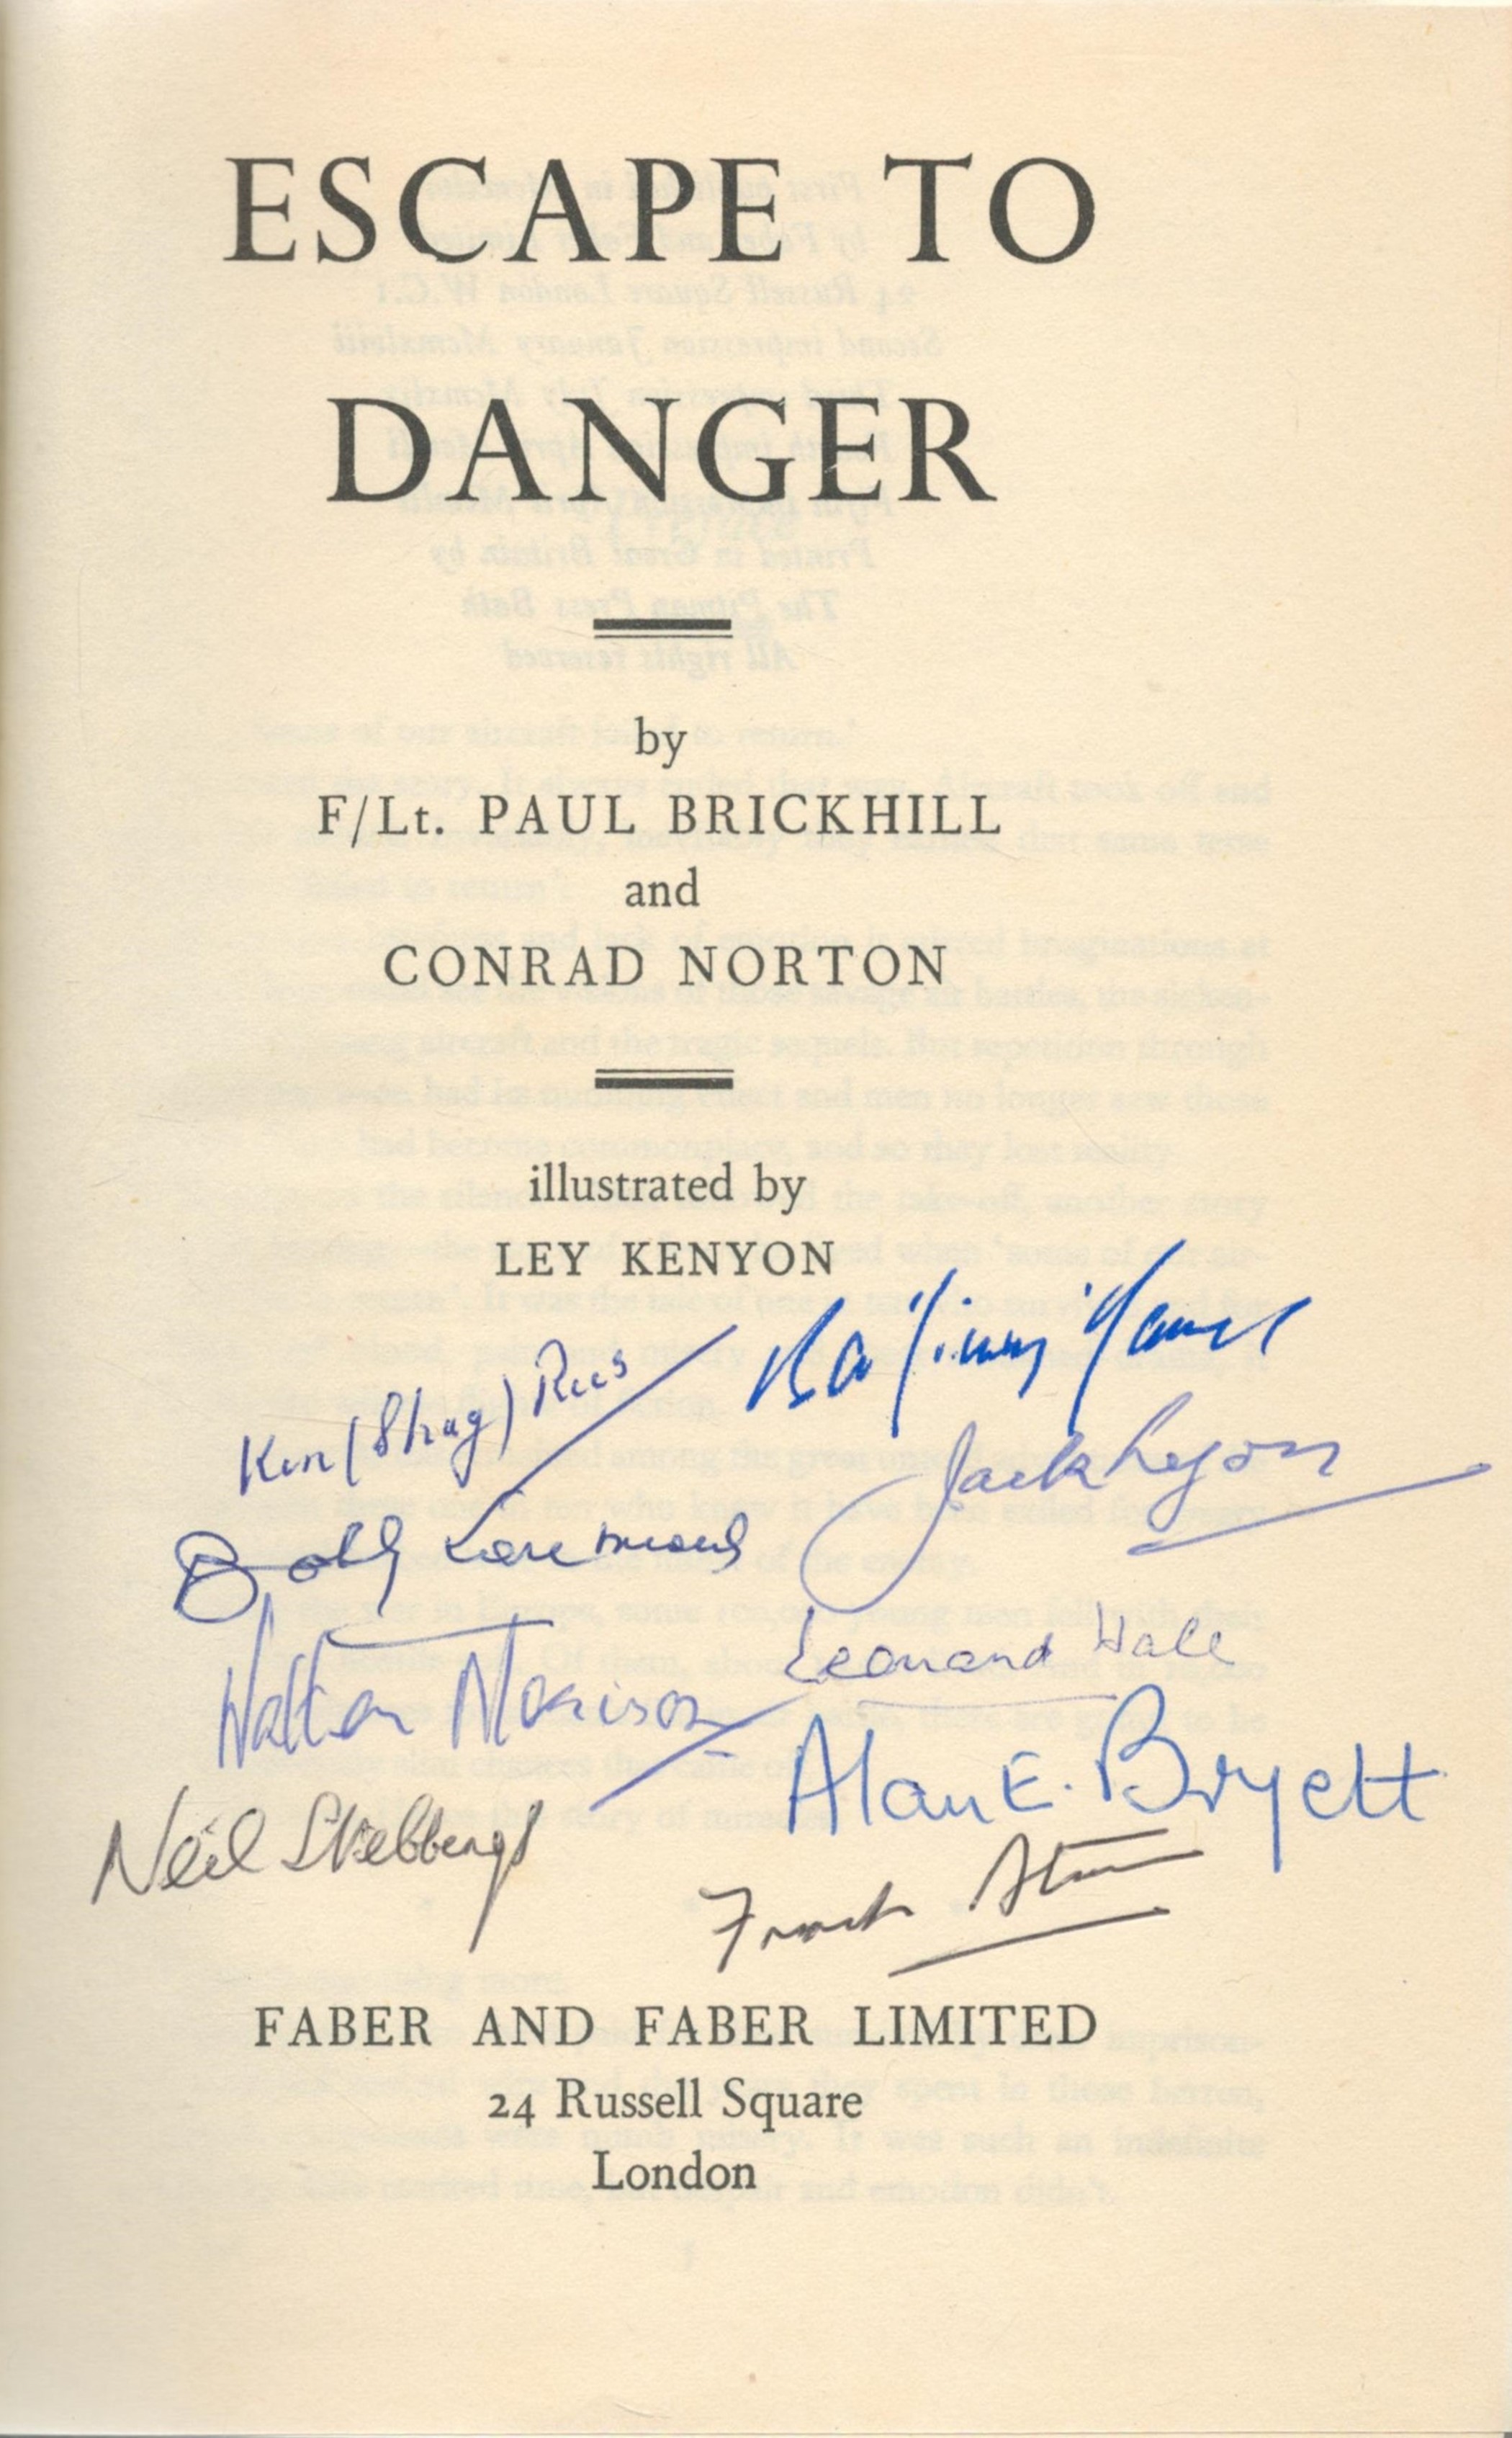 WW2 9 Signed Escape to Danger Hardback book by Flt Lt Paul Brickhill and Conrad Norton. Signed on